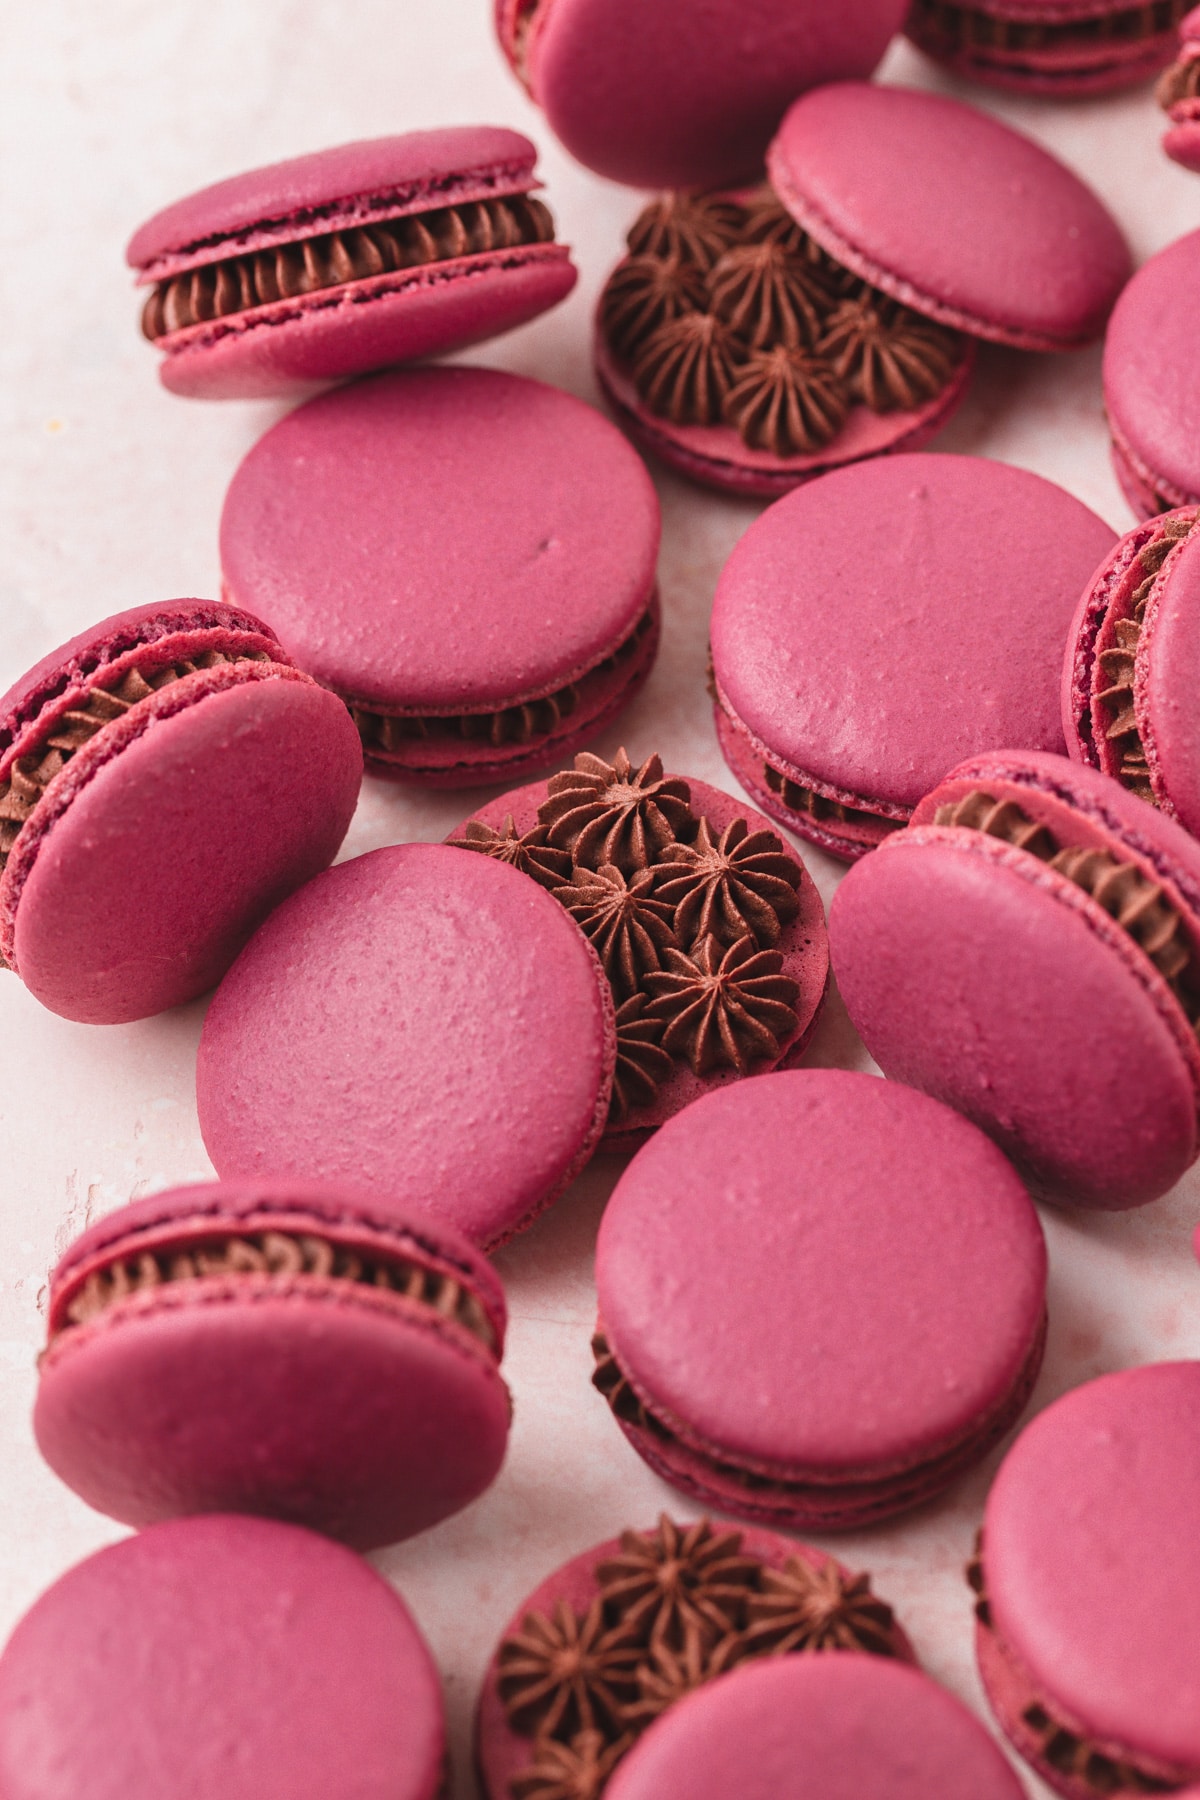 red wine macarons with whipped chocolate ganache.